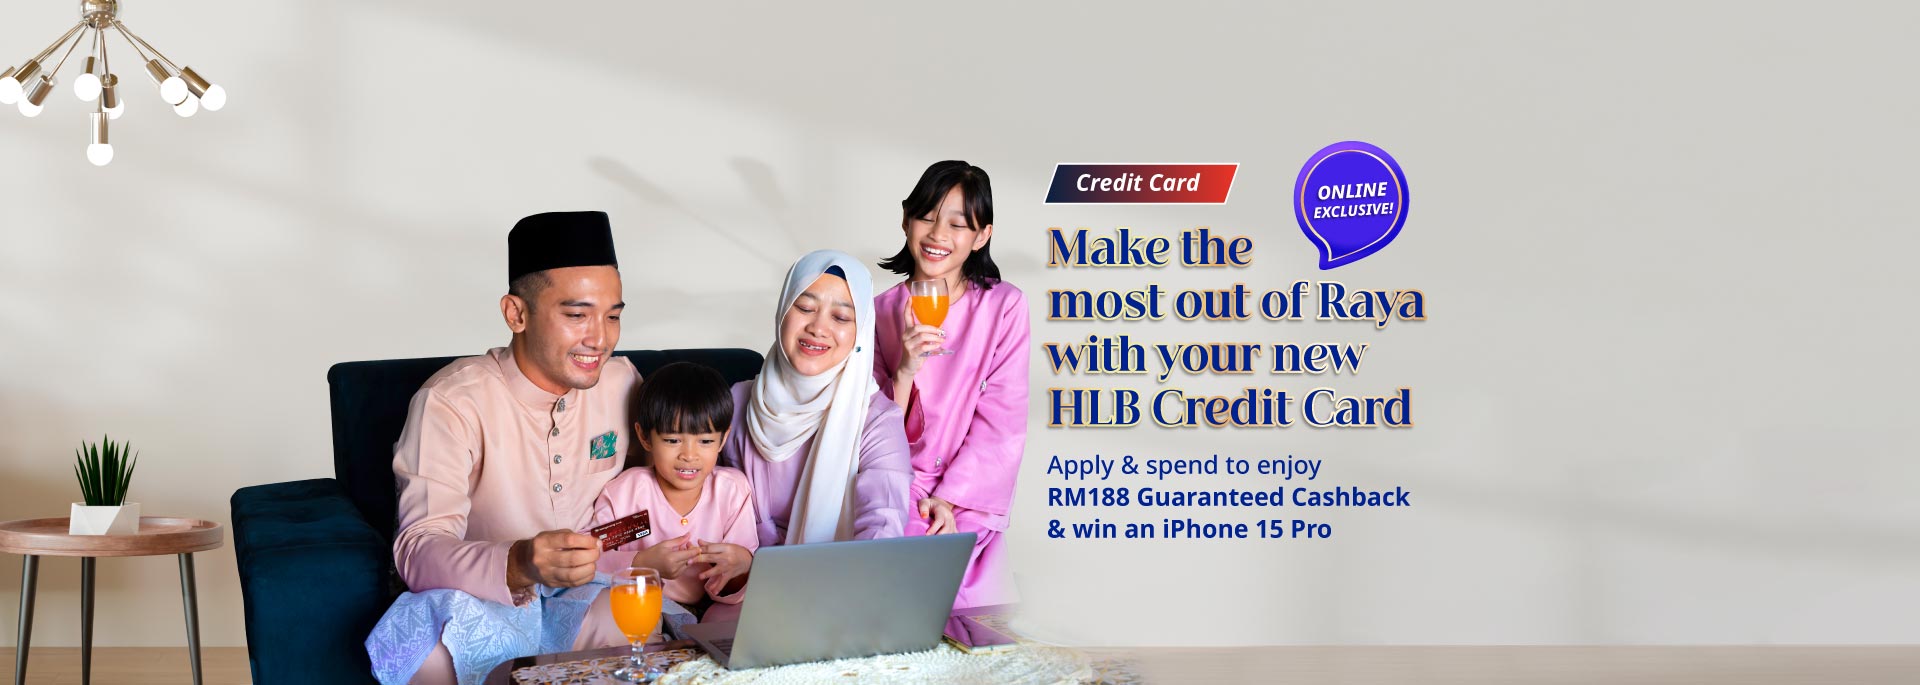 Apply & spend to enjoy RM188 Guaranteed Cashback & win an iPhone 15 Pro